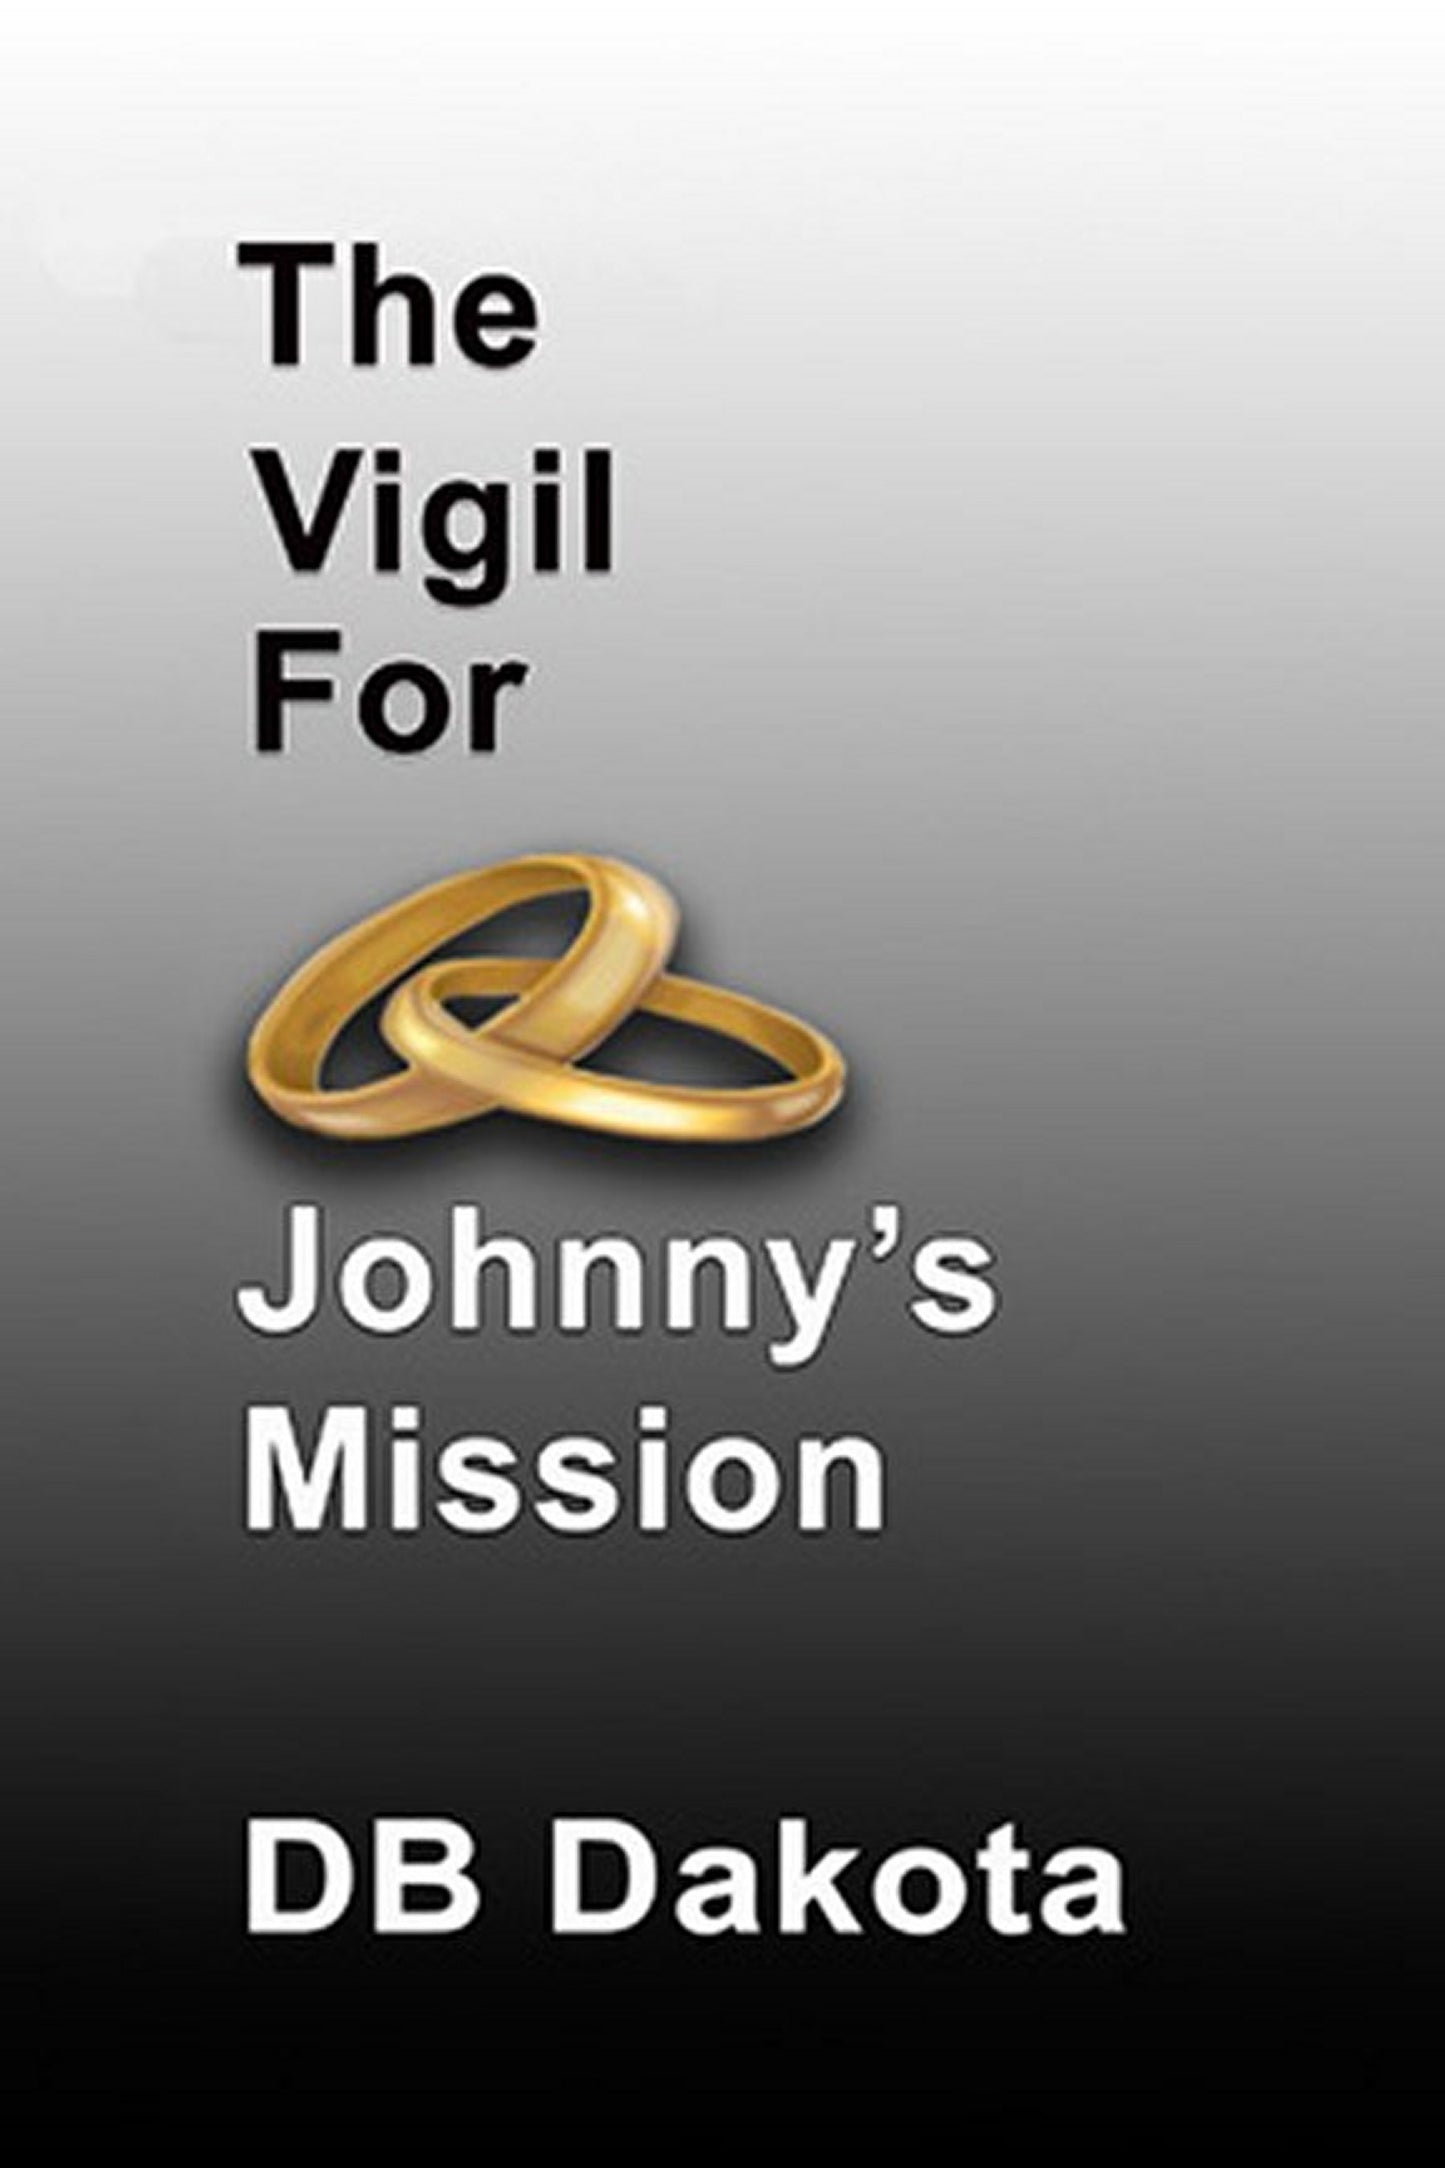 The Vigil For Johnny's Mission